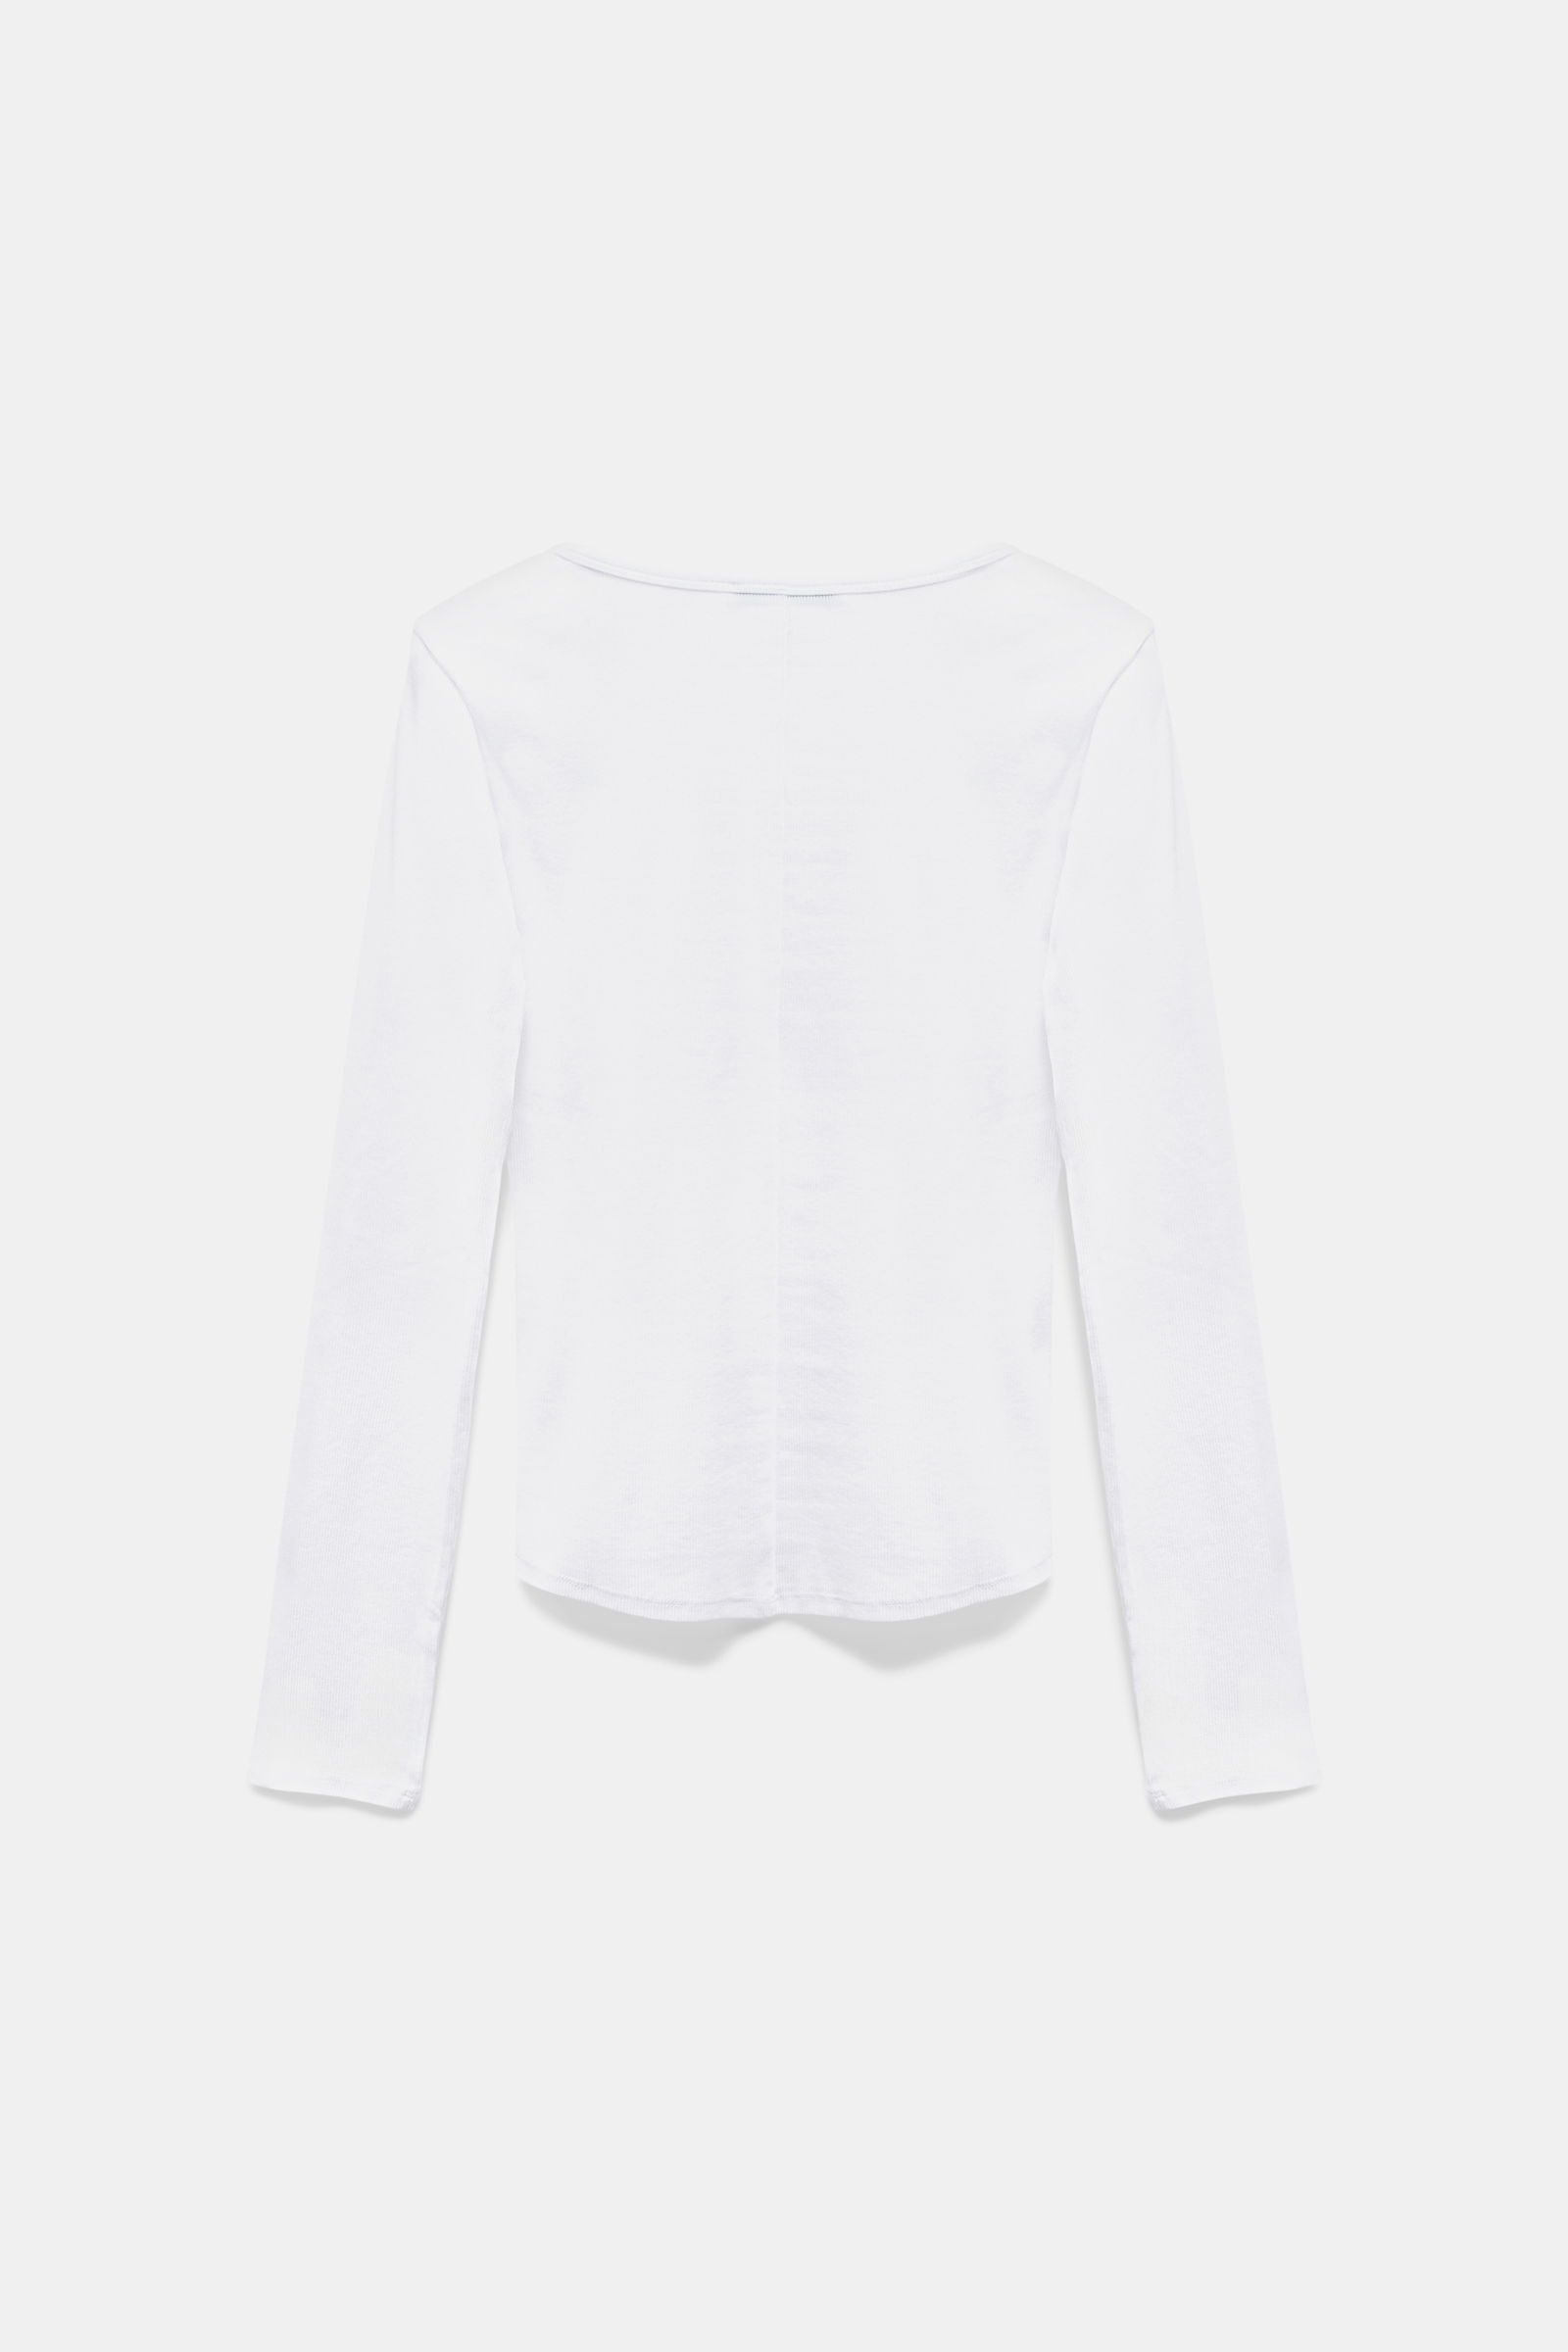 Dorothee Schumacher Fine rib stretch cotton scoop neck top with embellishment detail blue on white